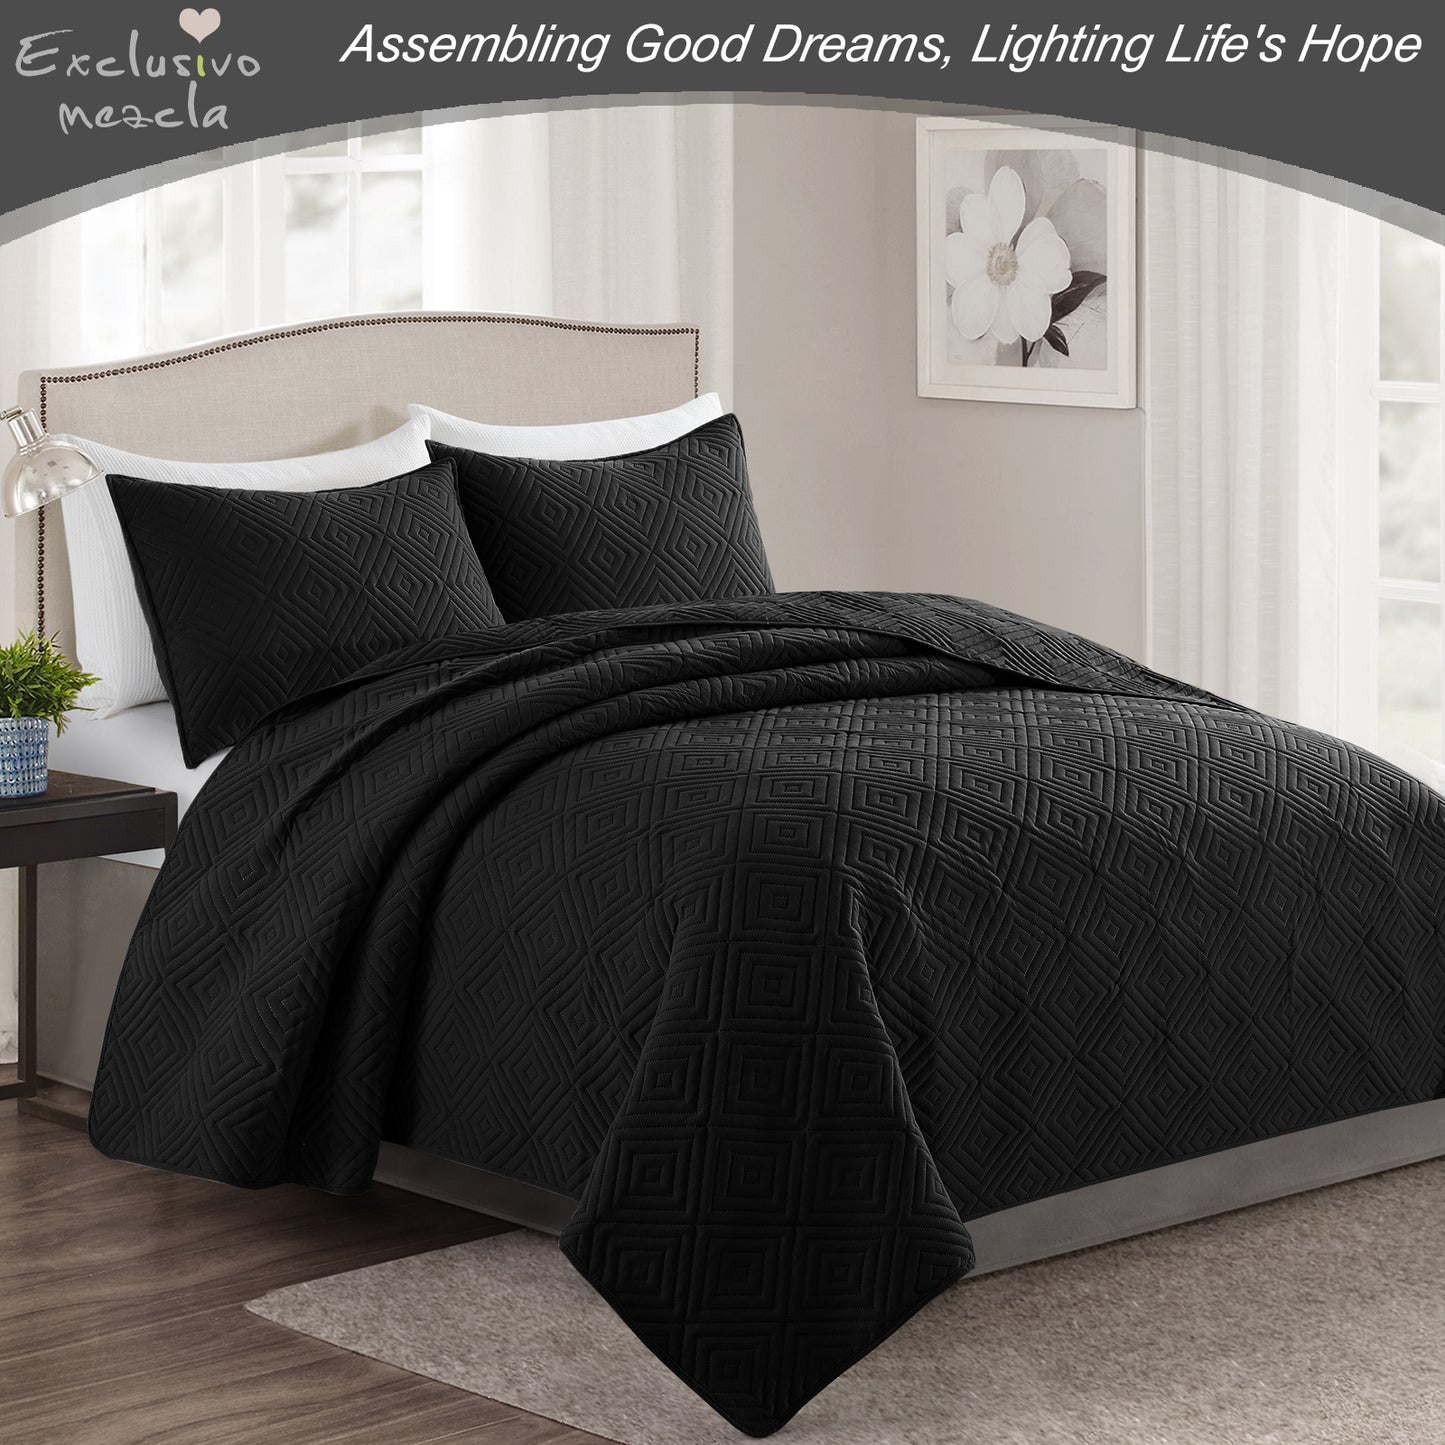 Exclusivo Mezcla 2-Piece Black Twin Size Quilt Set, Square Pattern Ultrasonic Lightweight and Soft Quilts/Bedspreads/Coverlets/Bedding Set (1 Quilt, 1 Pillow Sham) for All Seasons